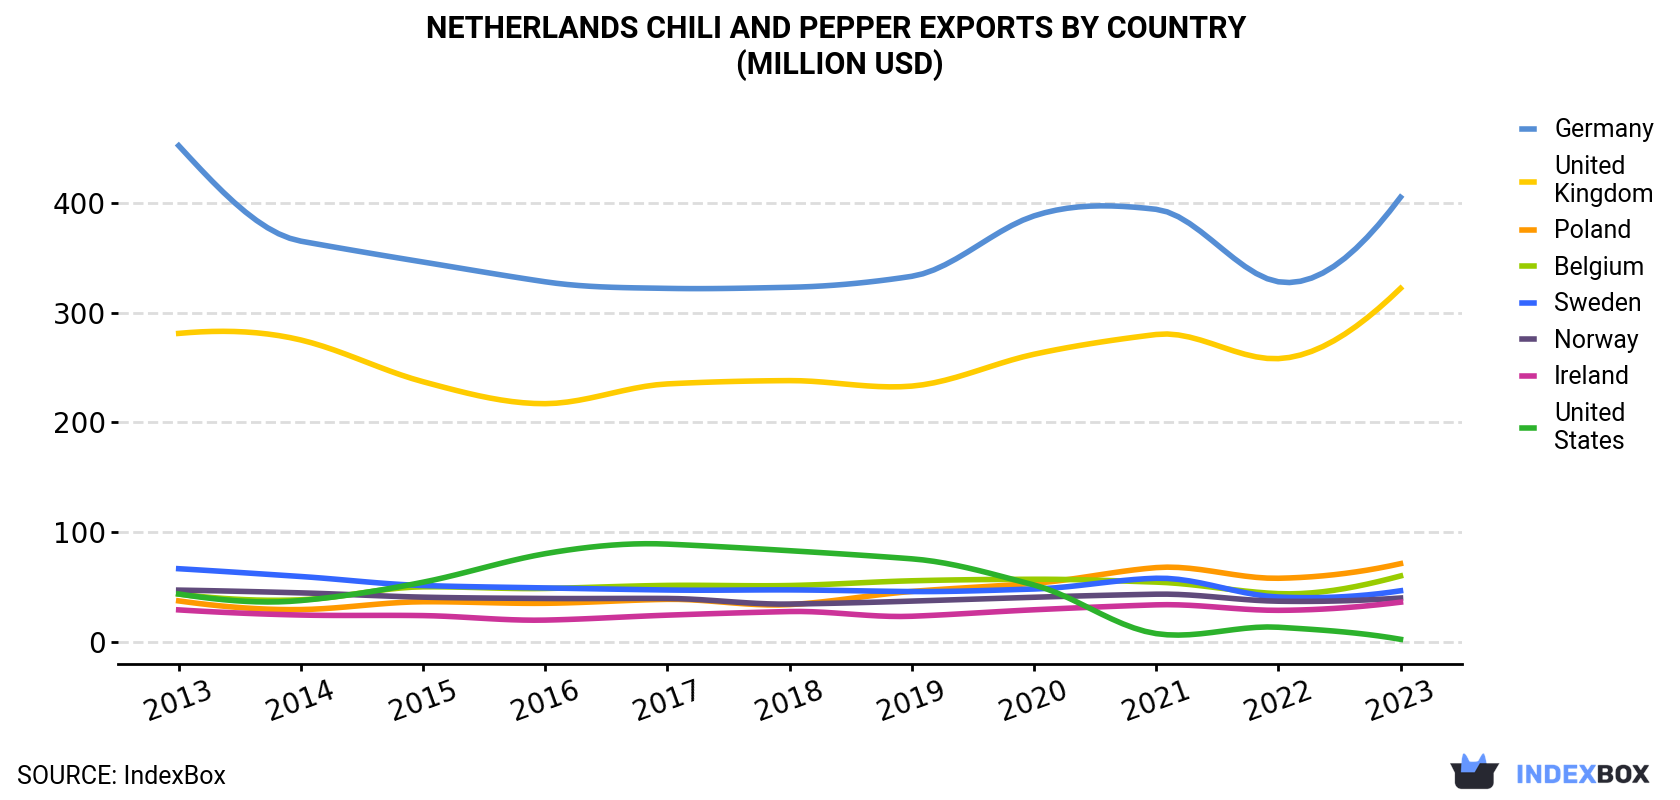 Netherlands Chili And Pepper Exports By Country (Million USD)